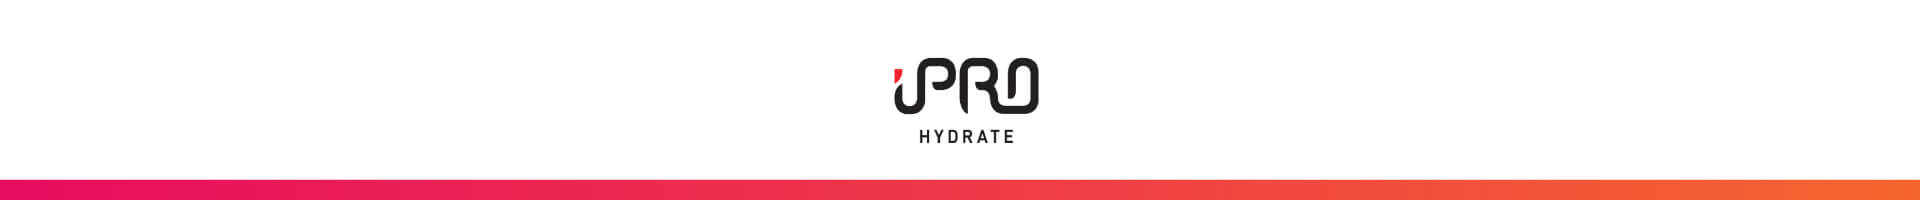 ipro hydrate banner